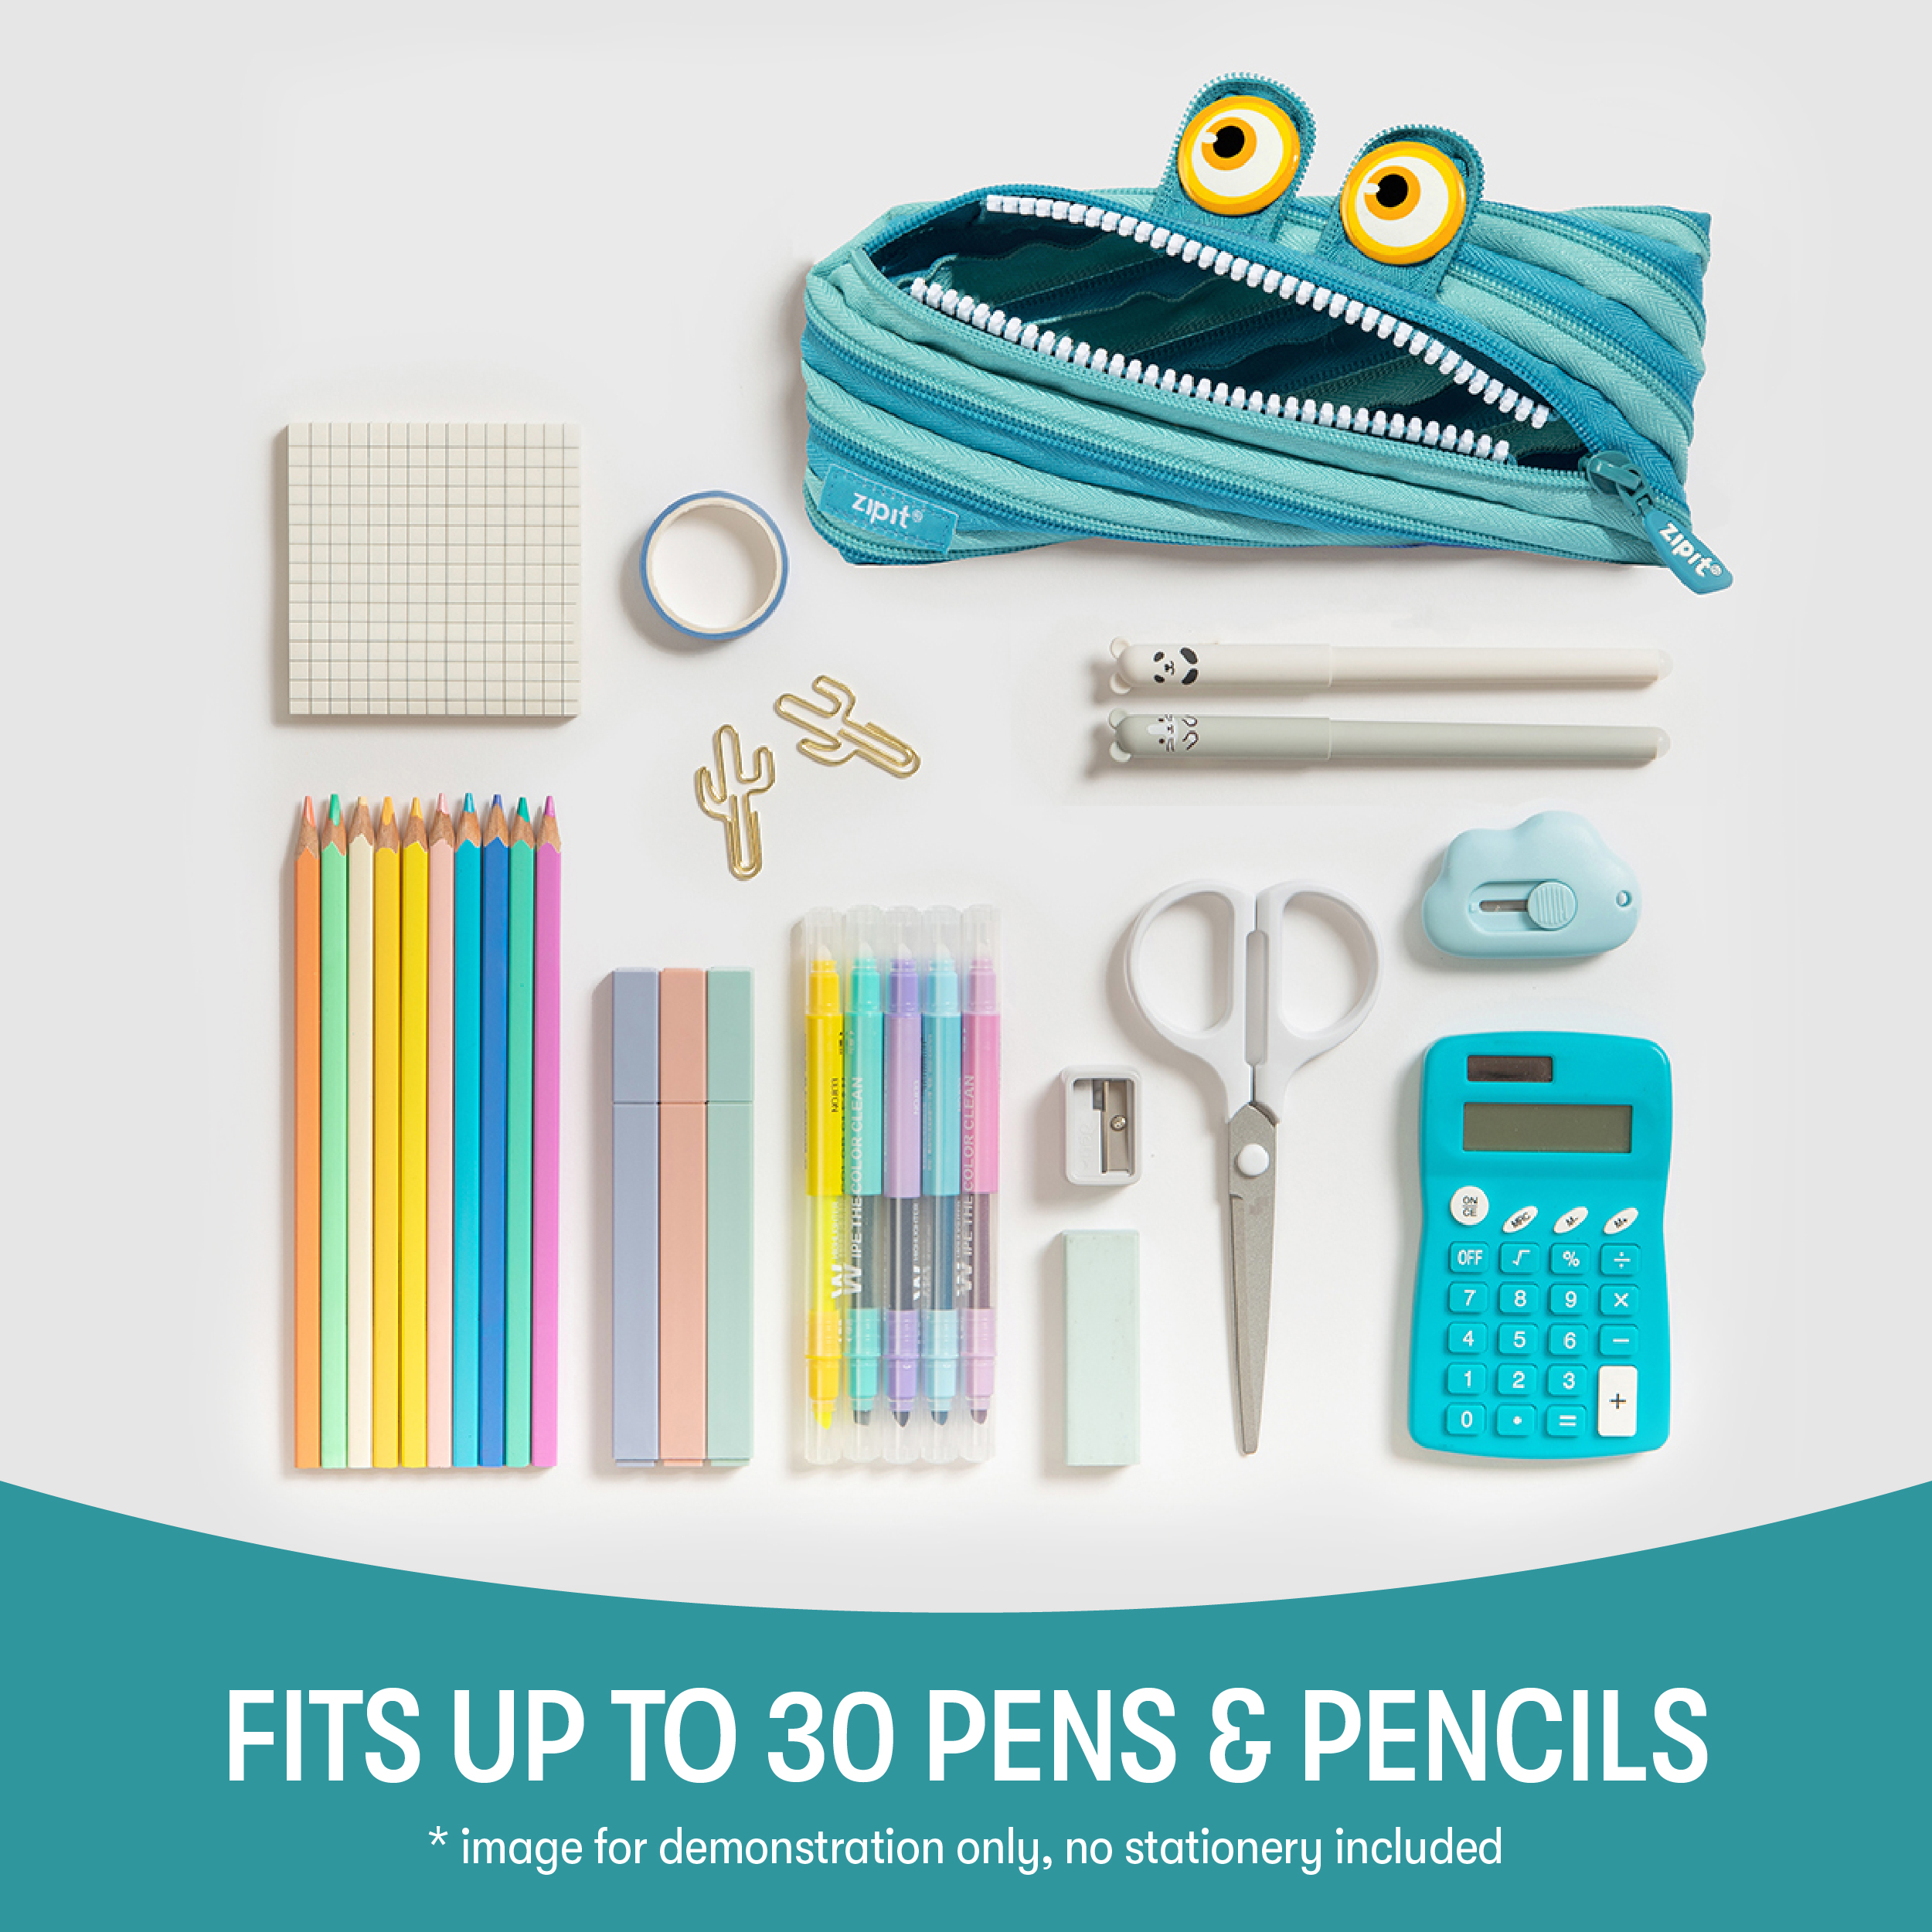 ZIPIT Wildlings Pencil Case for Kids, Holds up to 30 Pens (Blue) - image 4 of 9